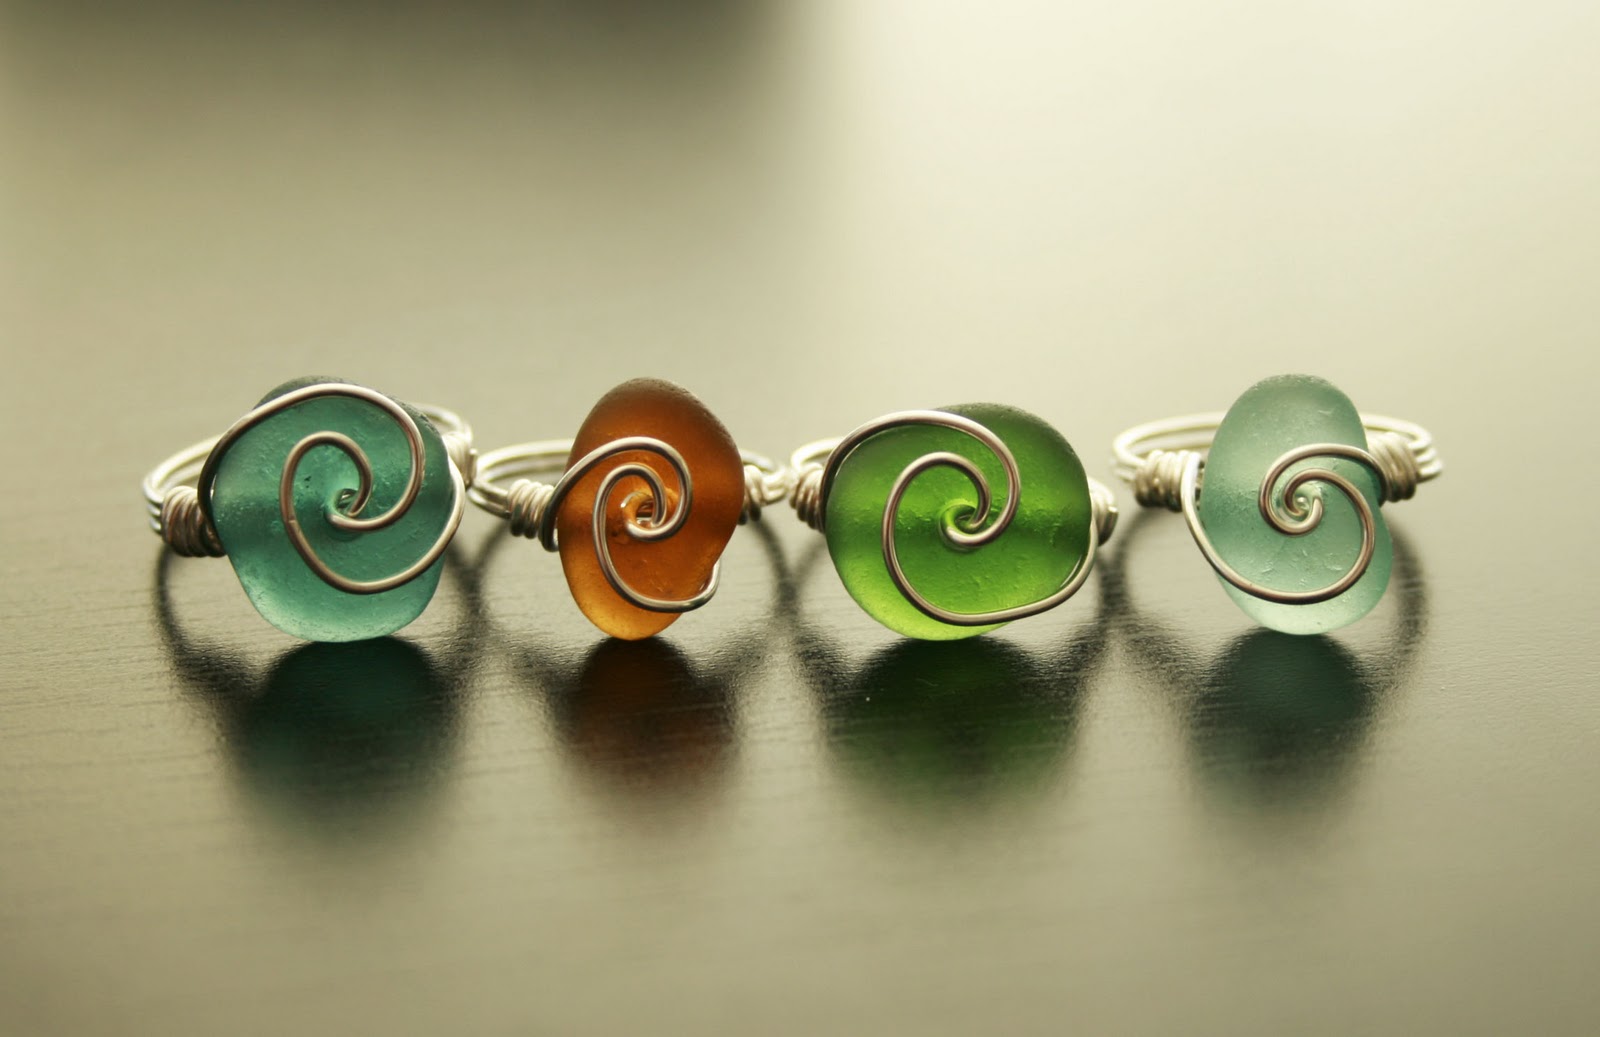 Ocean Charms Jewelry...The Beauty of Sea Glass: New Sea Glass Wave Rings